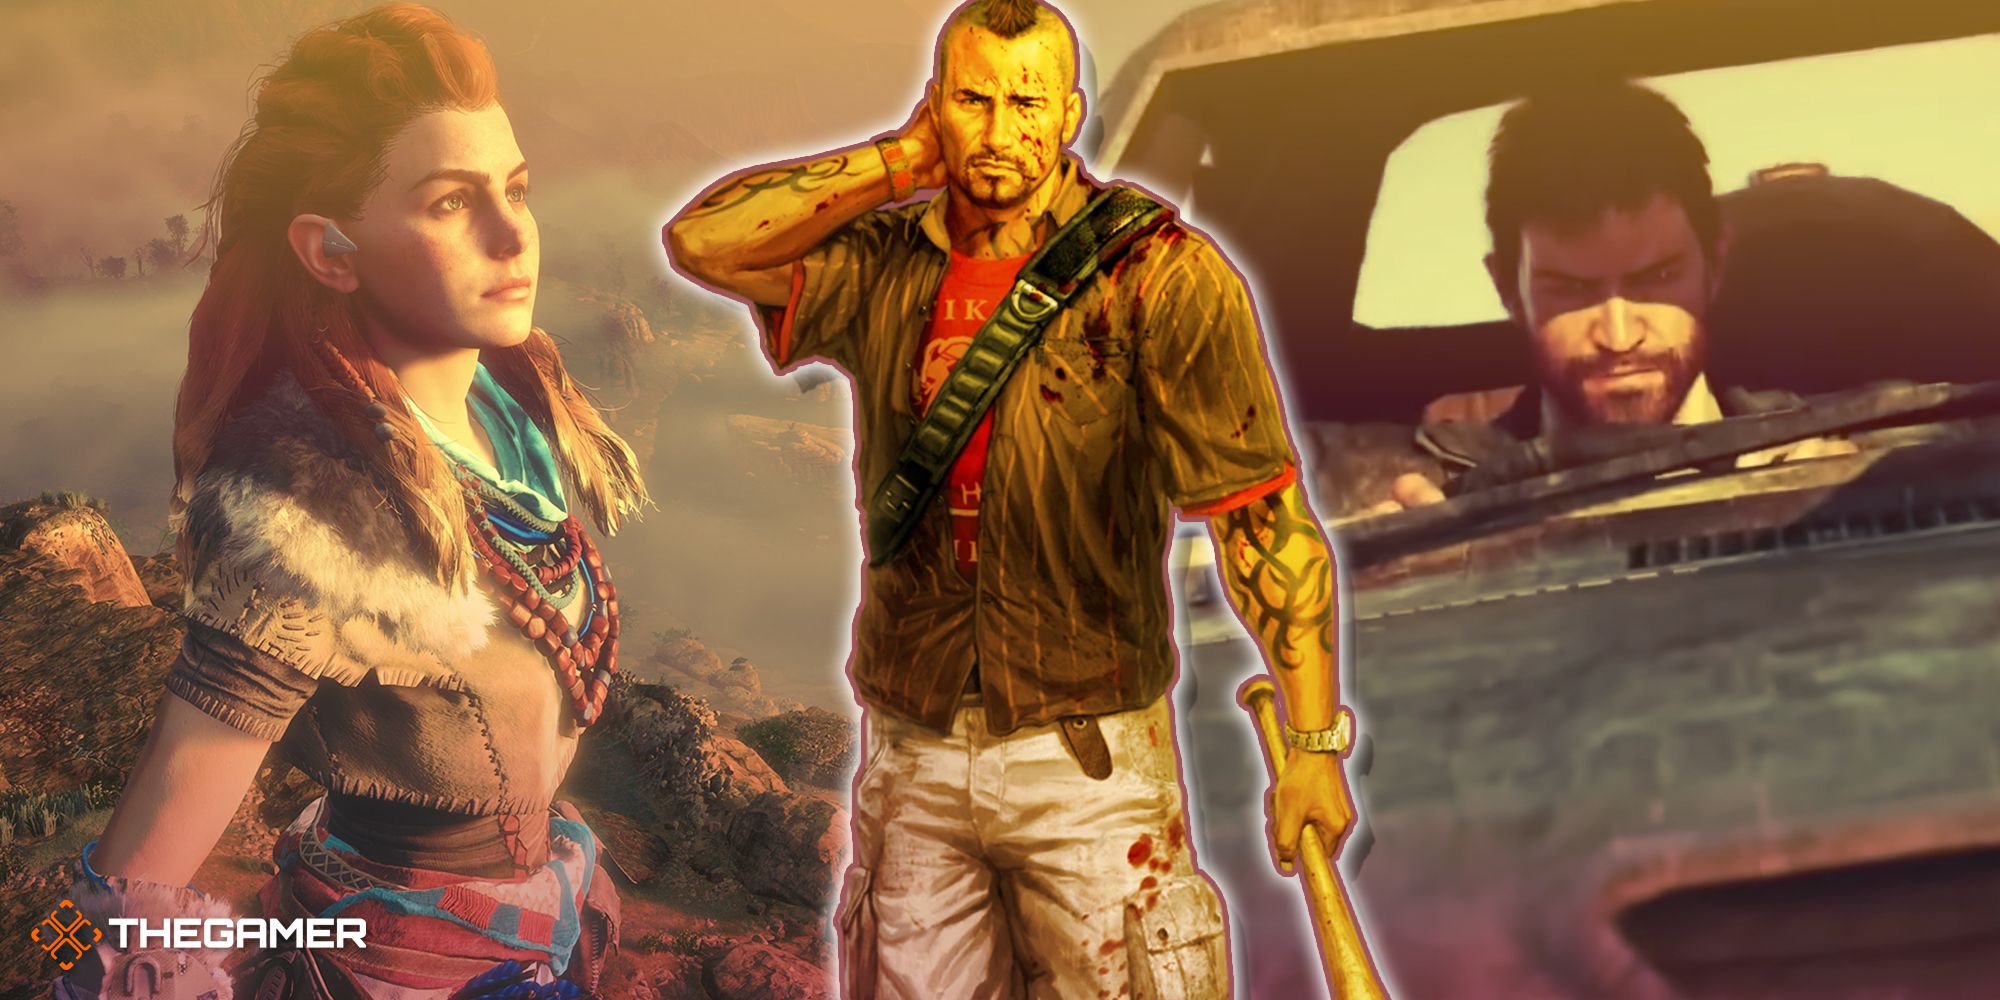 Game images from Dead Island, Horizon Zero Dawn and Mad Max.